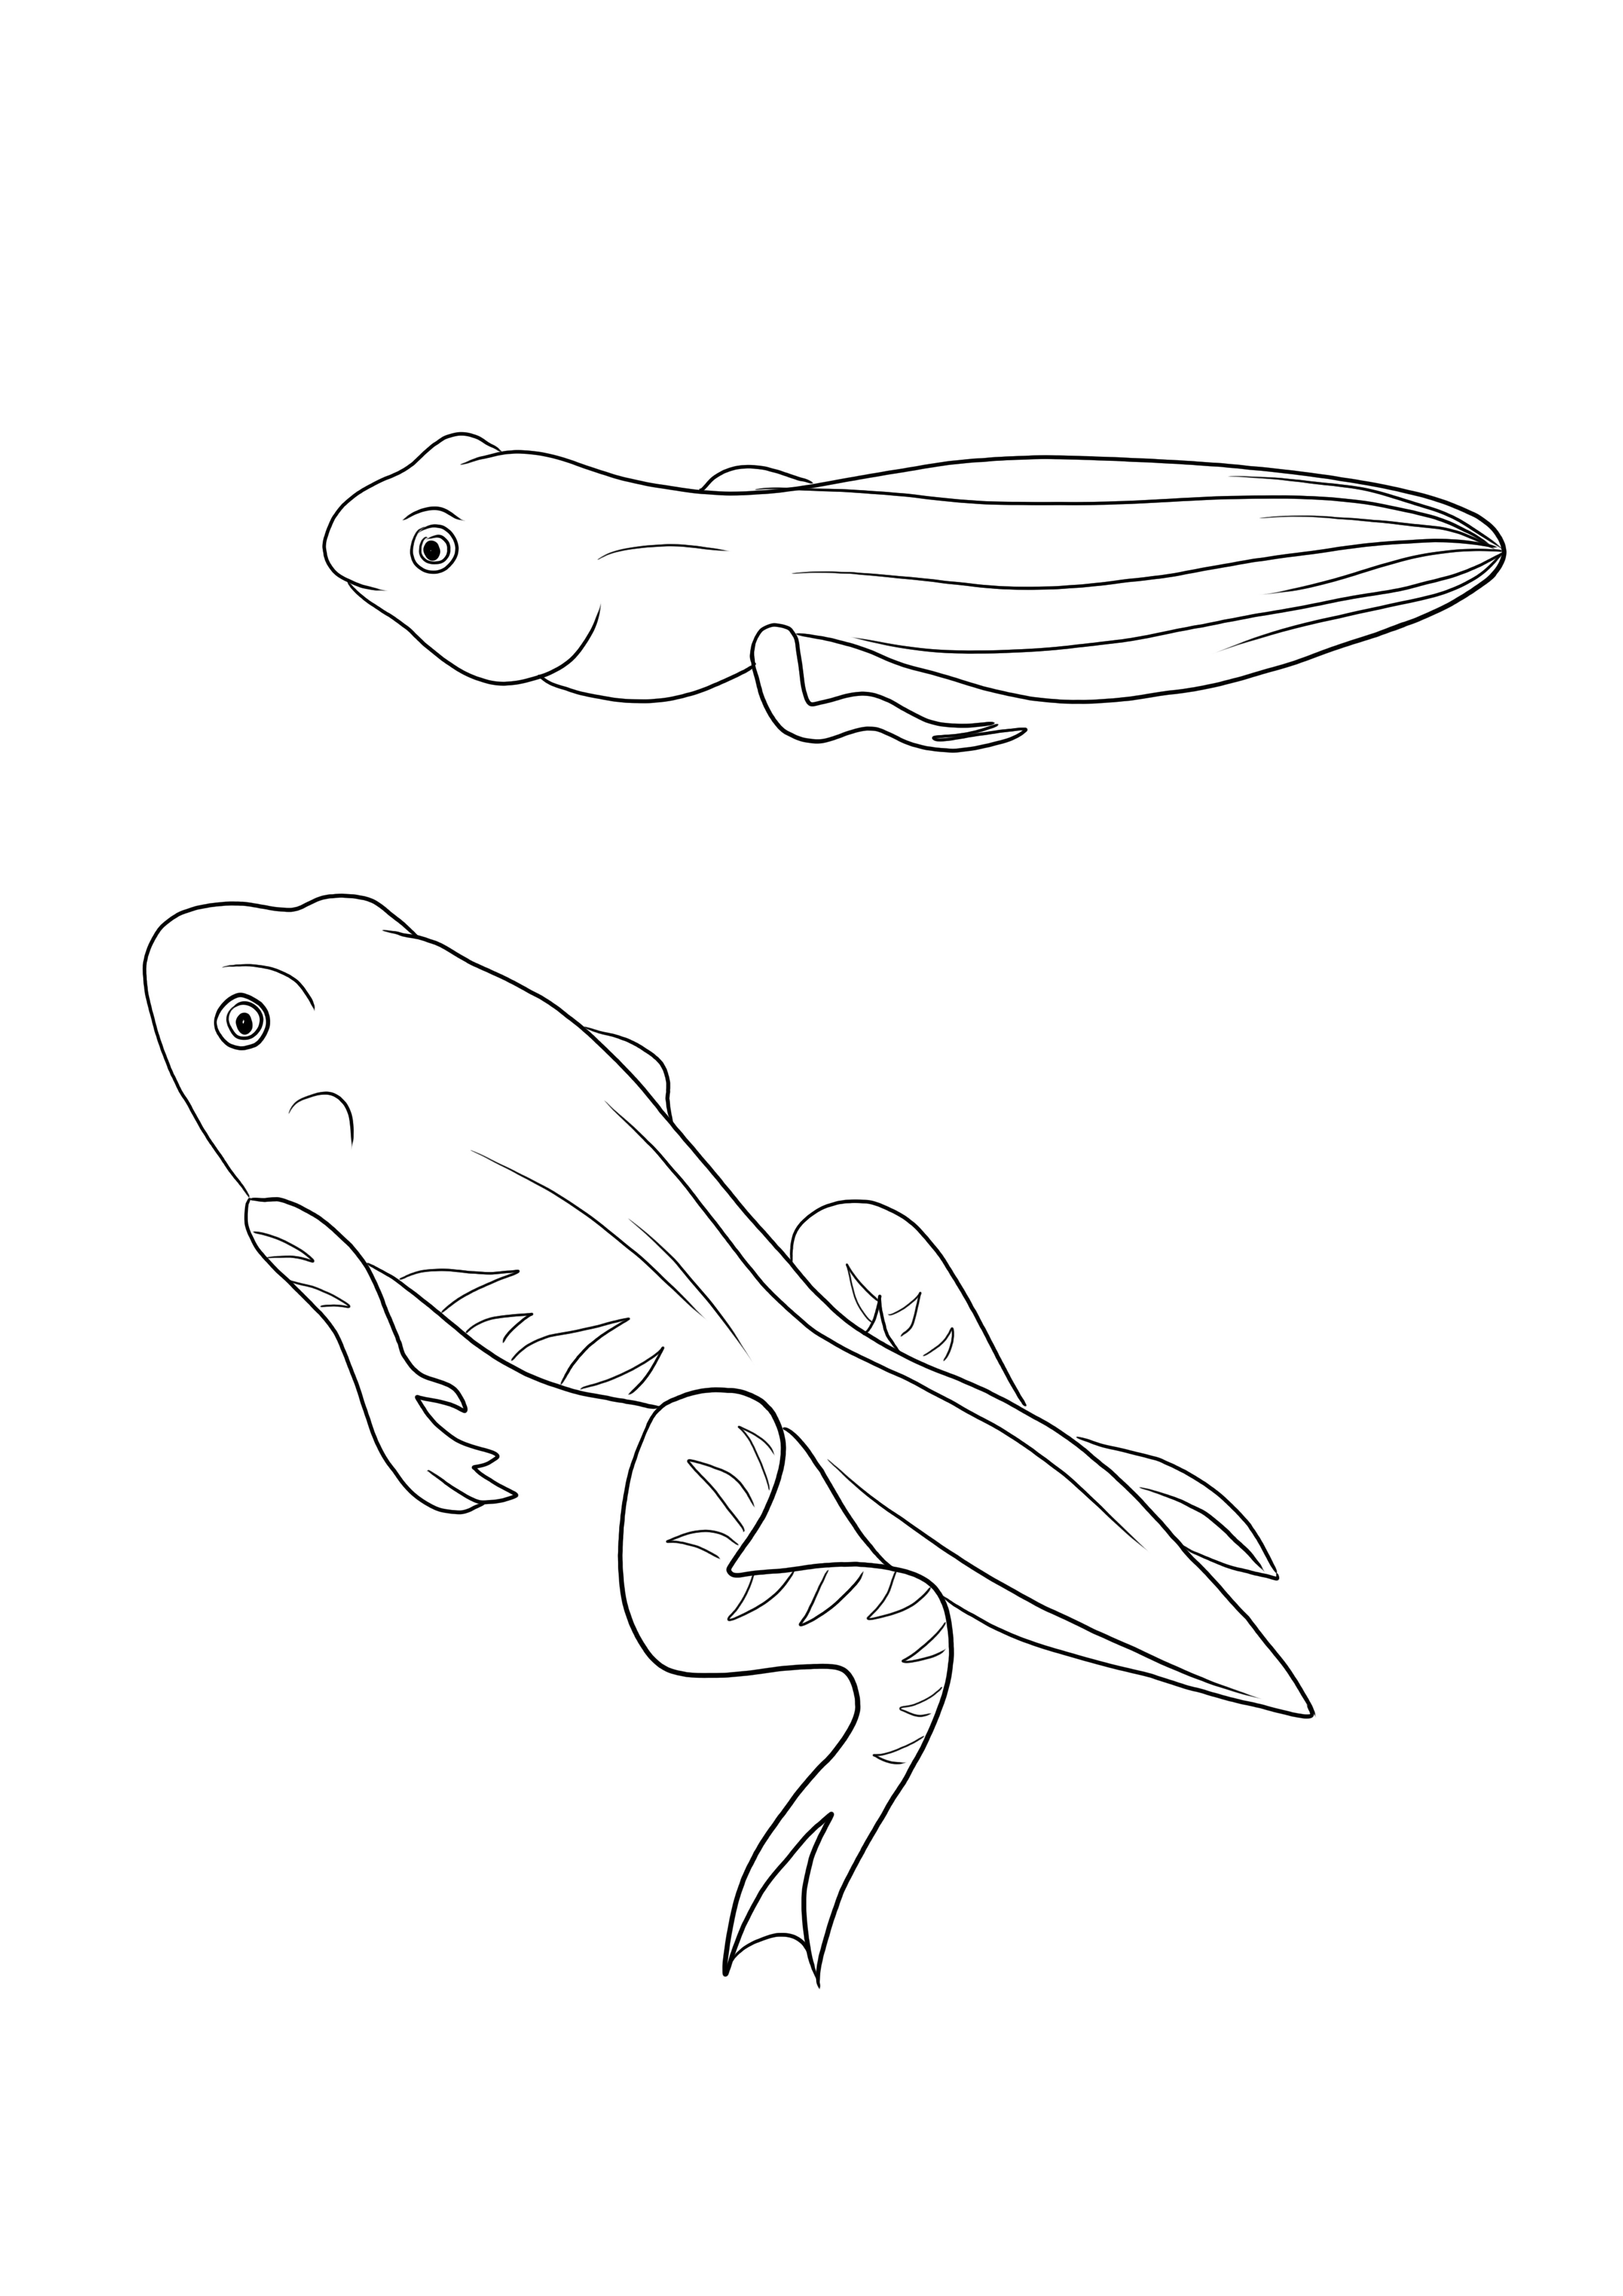 A simple to-color sheet of a Tadpole and Froglet to print for free and learn about the life cycle of a frog